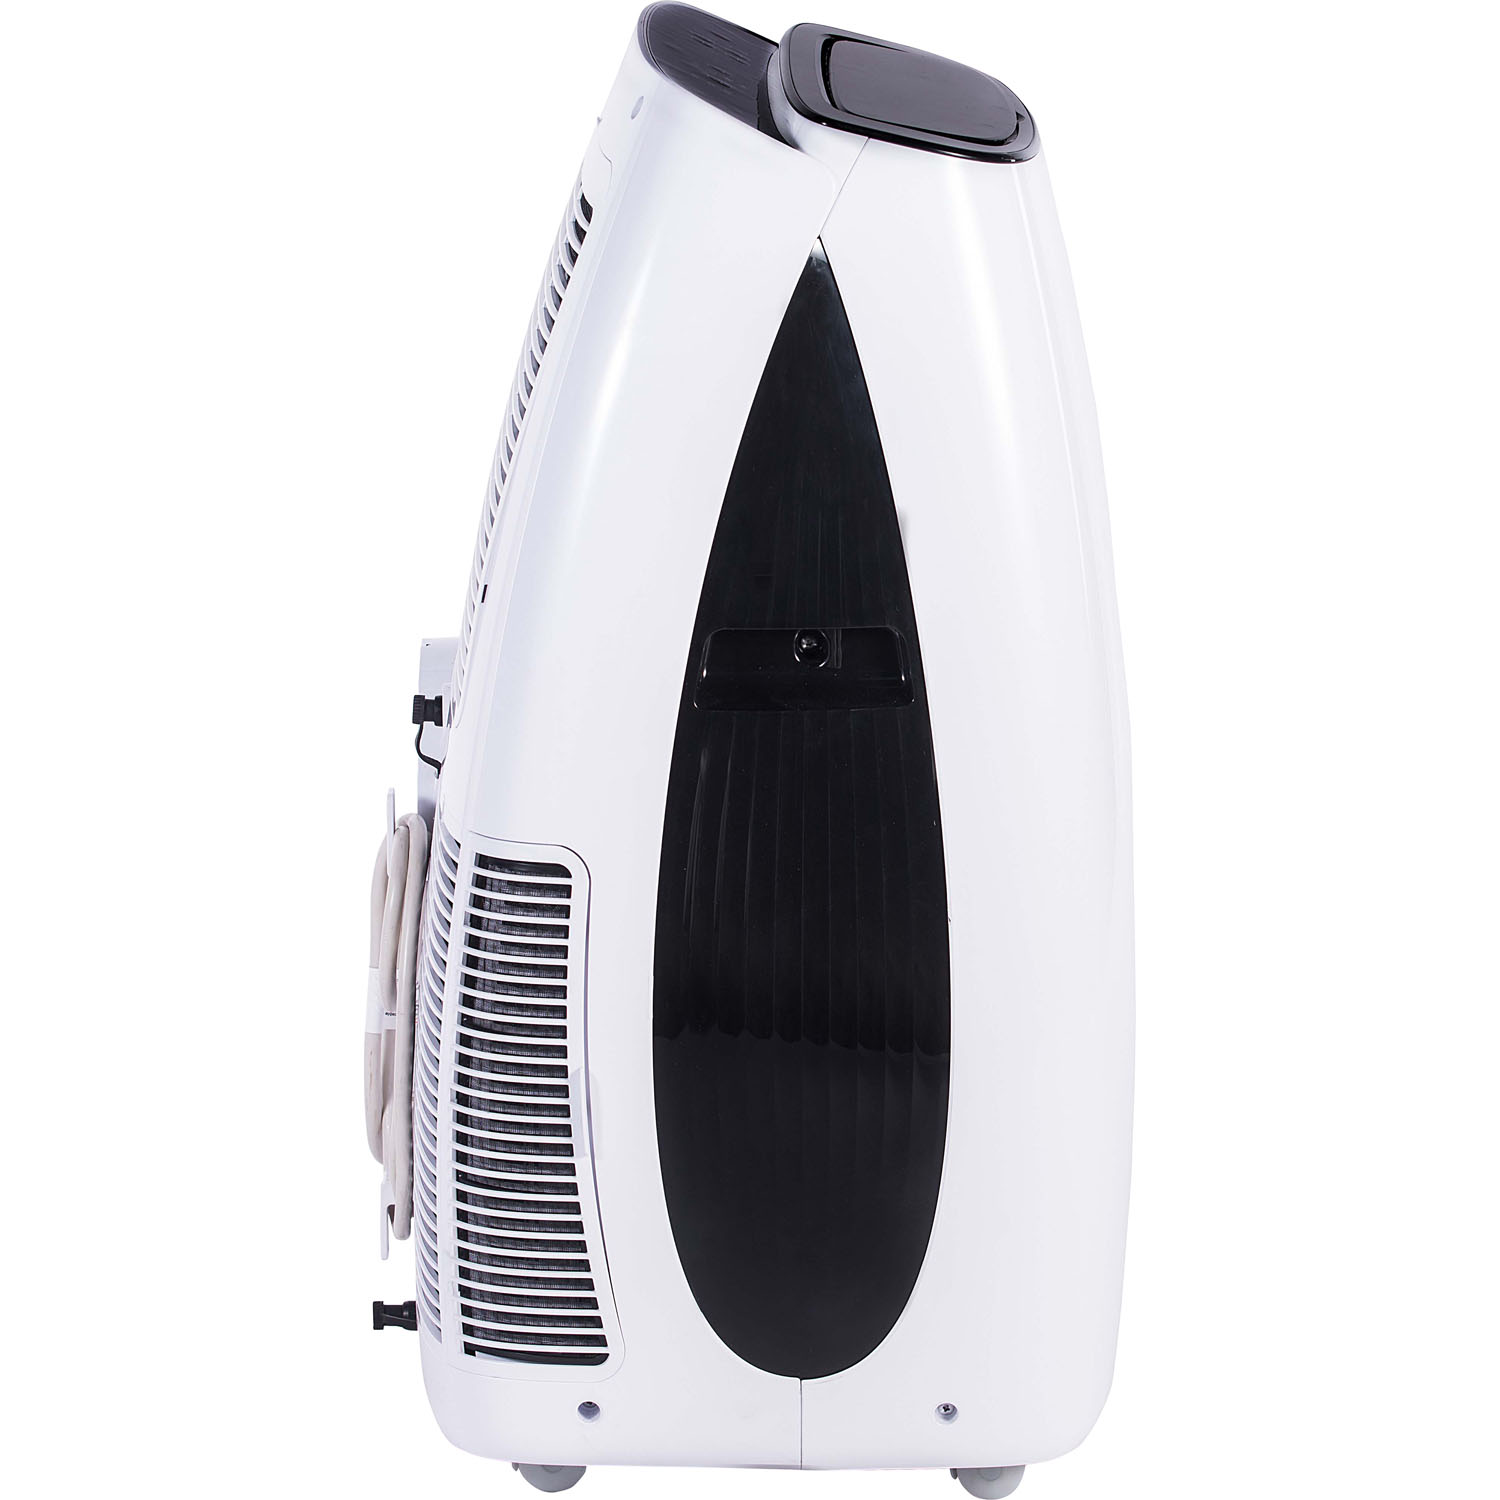 Quilo Portable Air Conditioner with Remote Control for a Room up to 550 Sq. Ft. - image 4 of 9